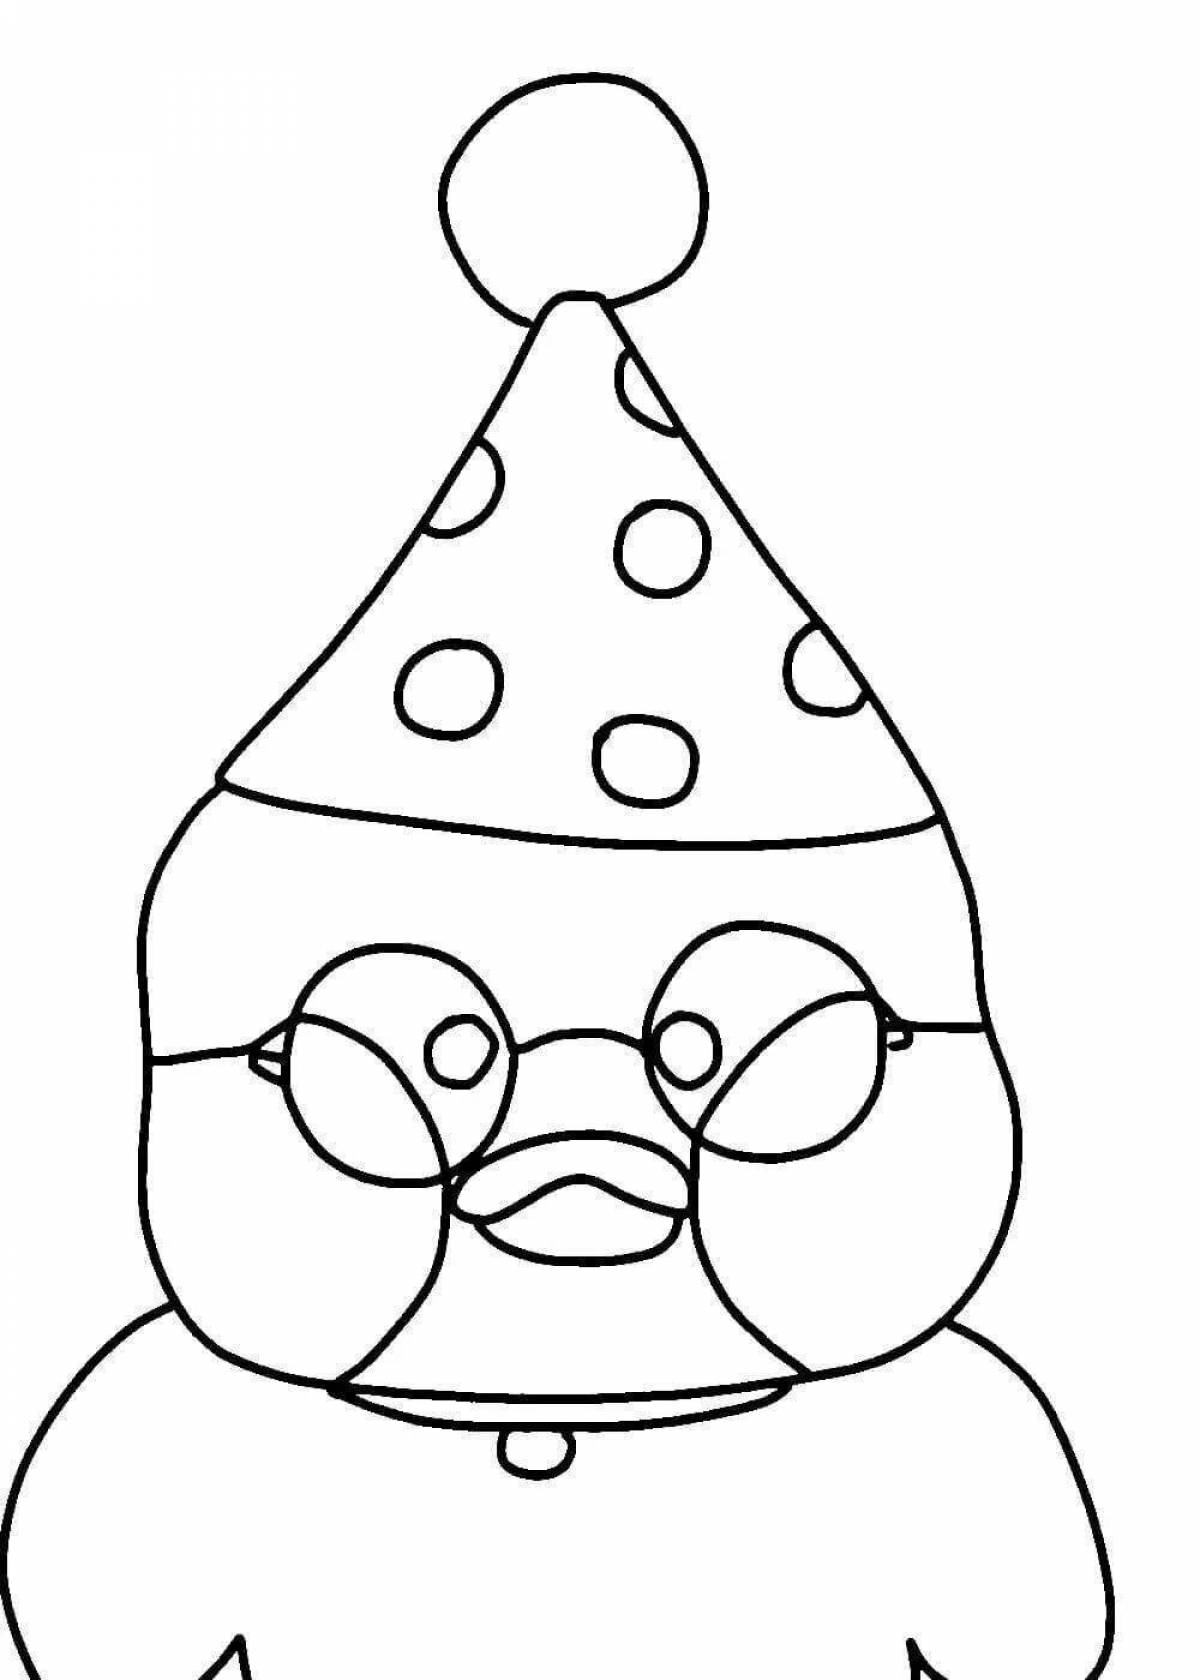 Amazing lalafanfan big duck coloring page